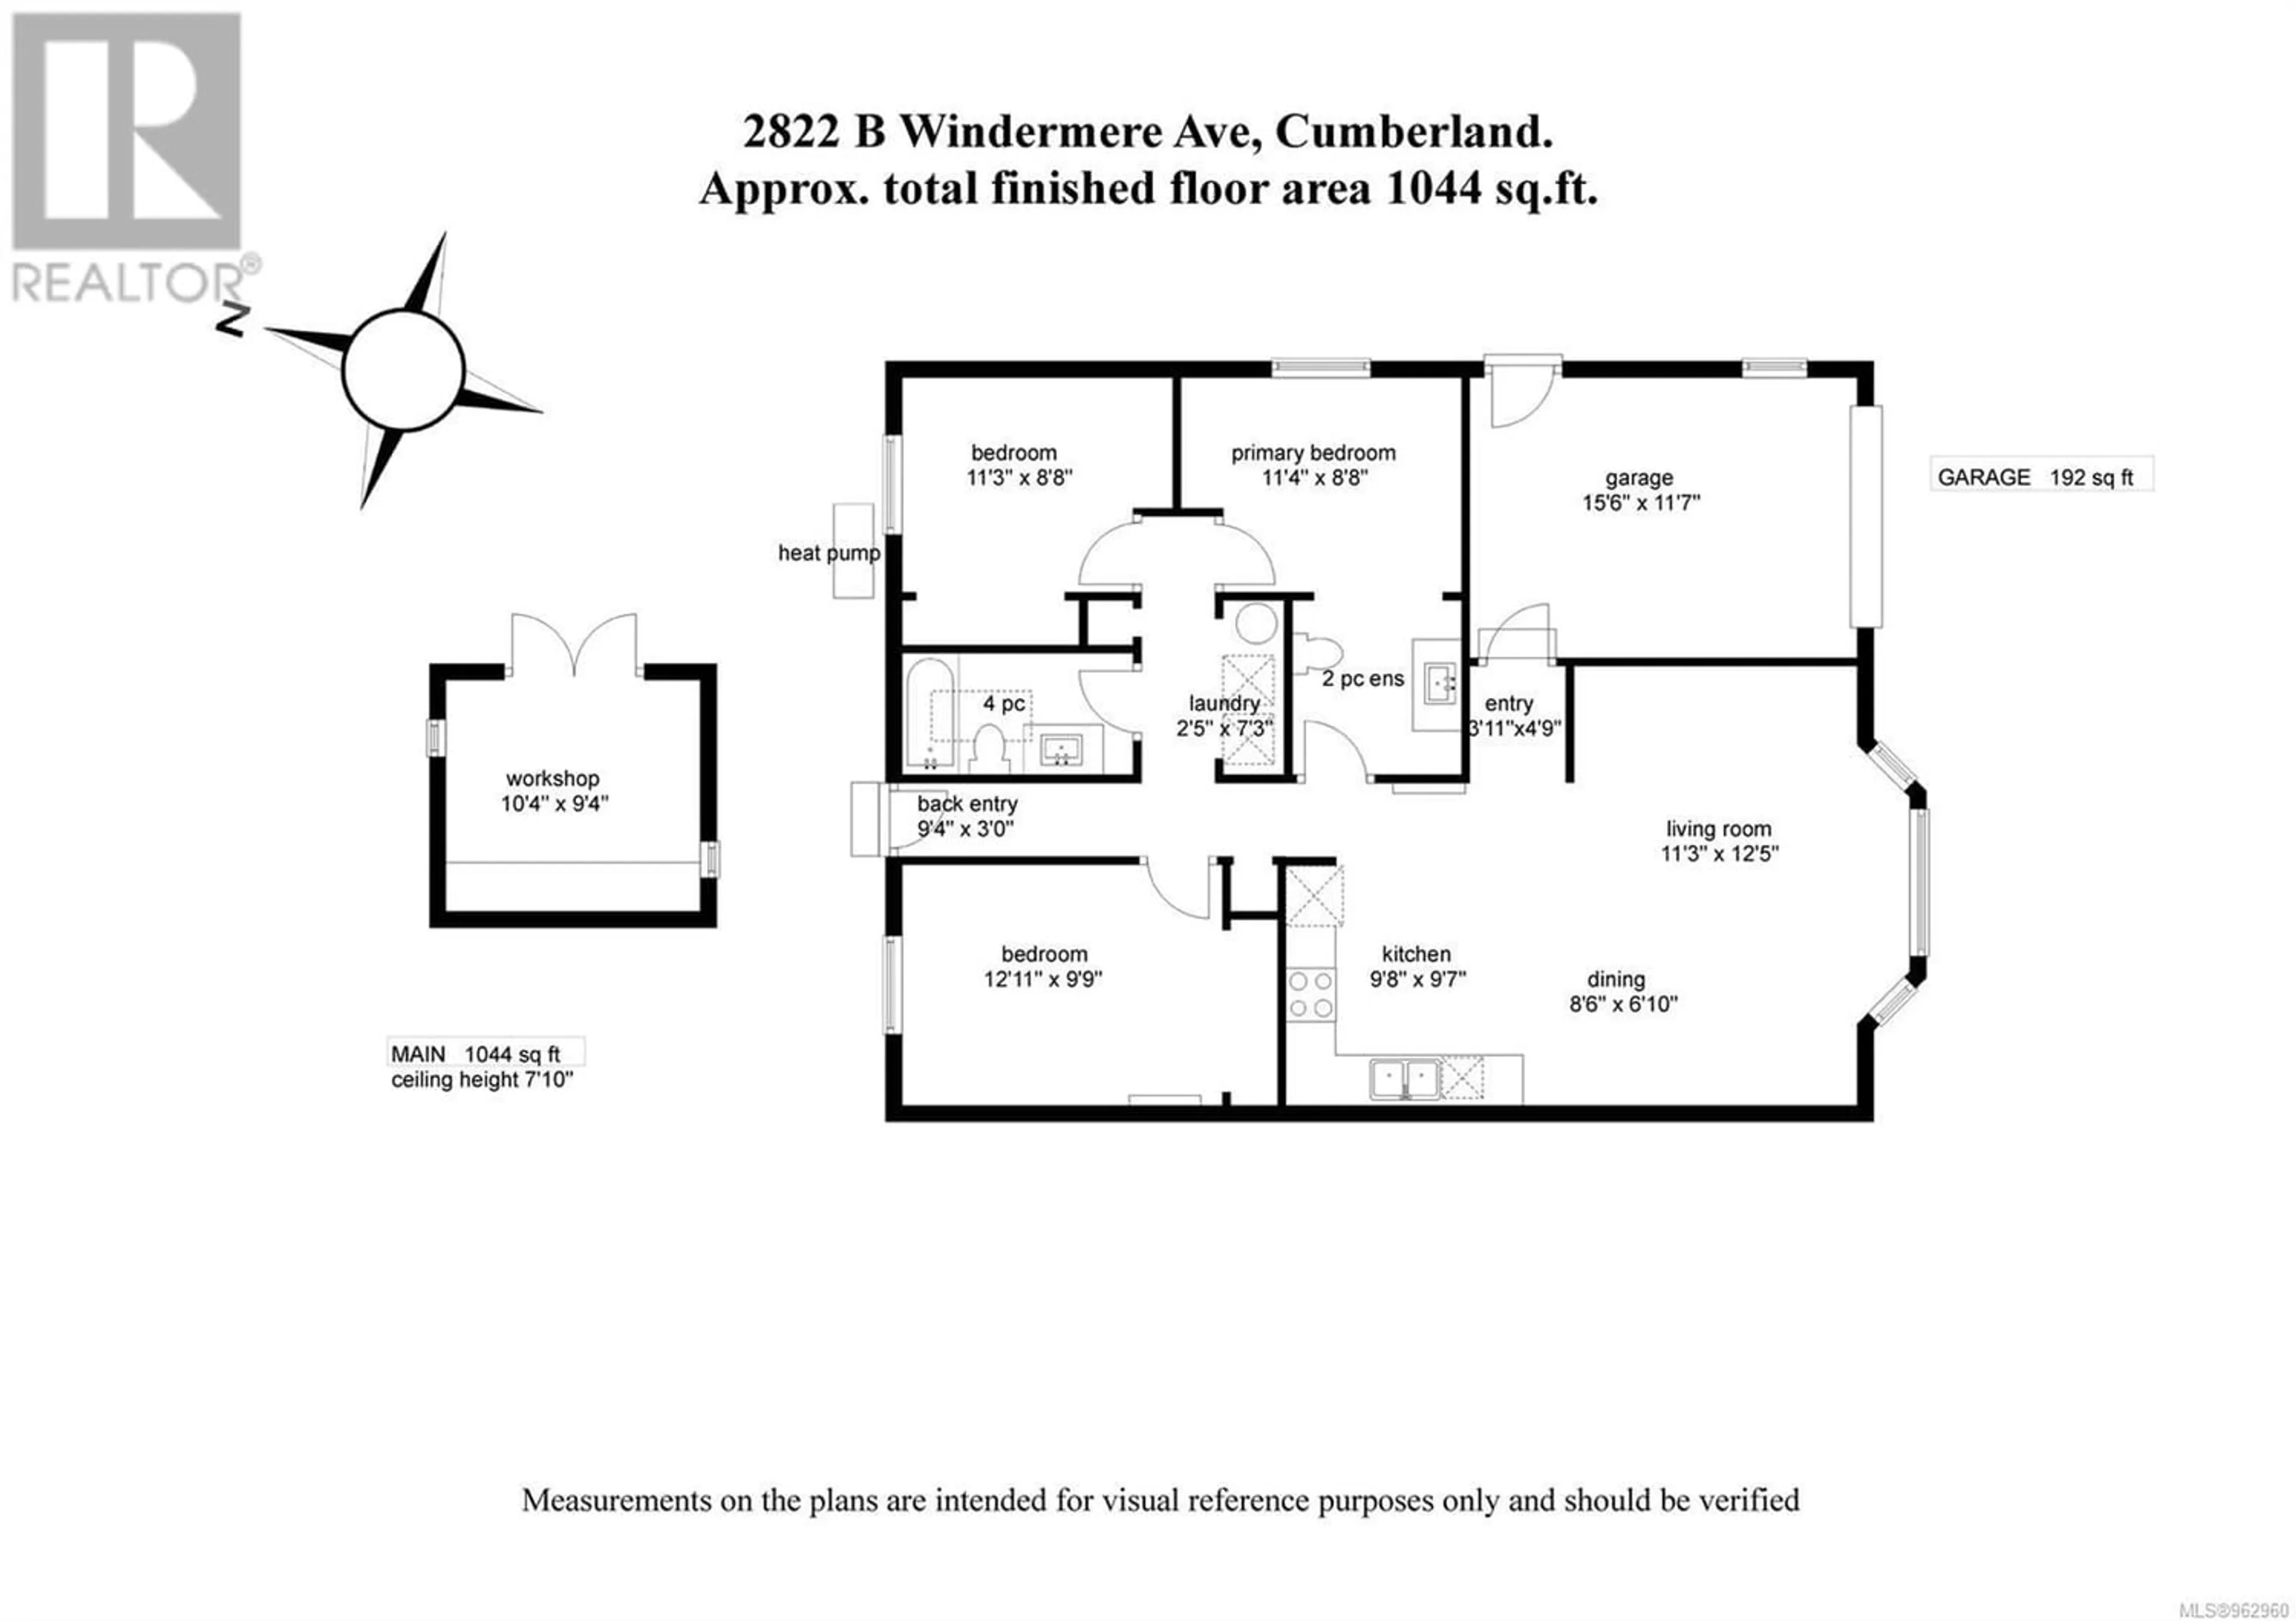 Floor plan for B 2822 Windermere Ave, Cumberland British Columbia V0R1S0